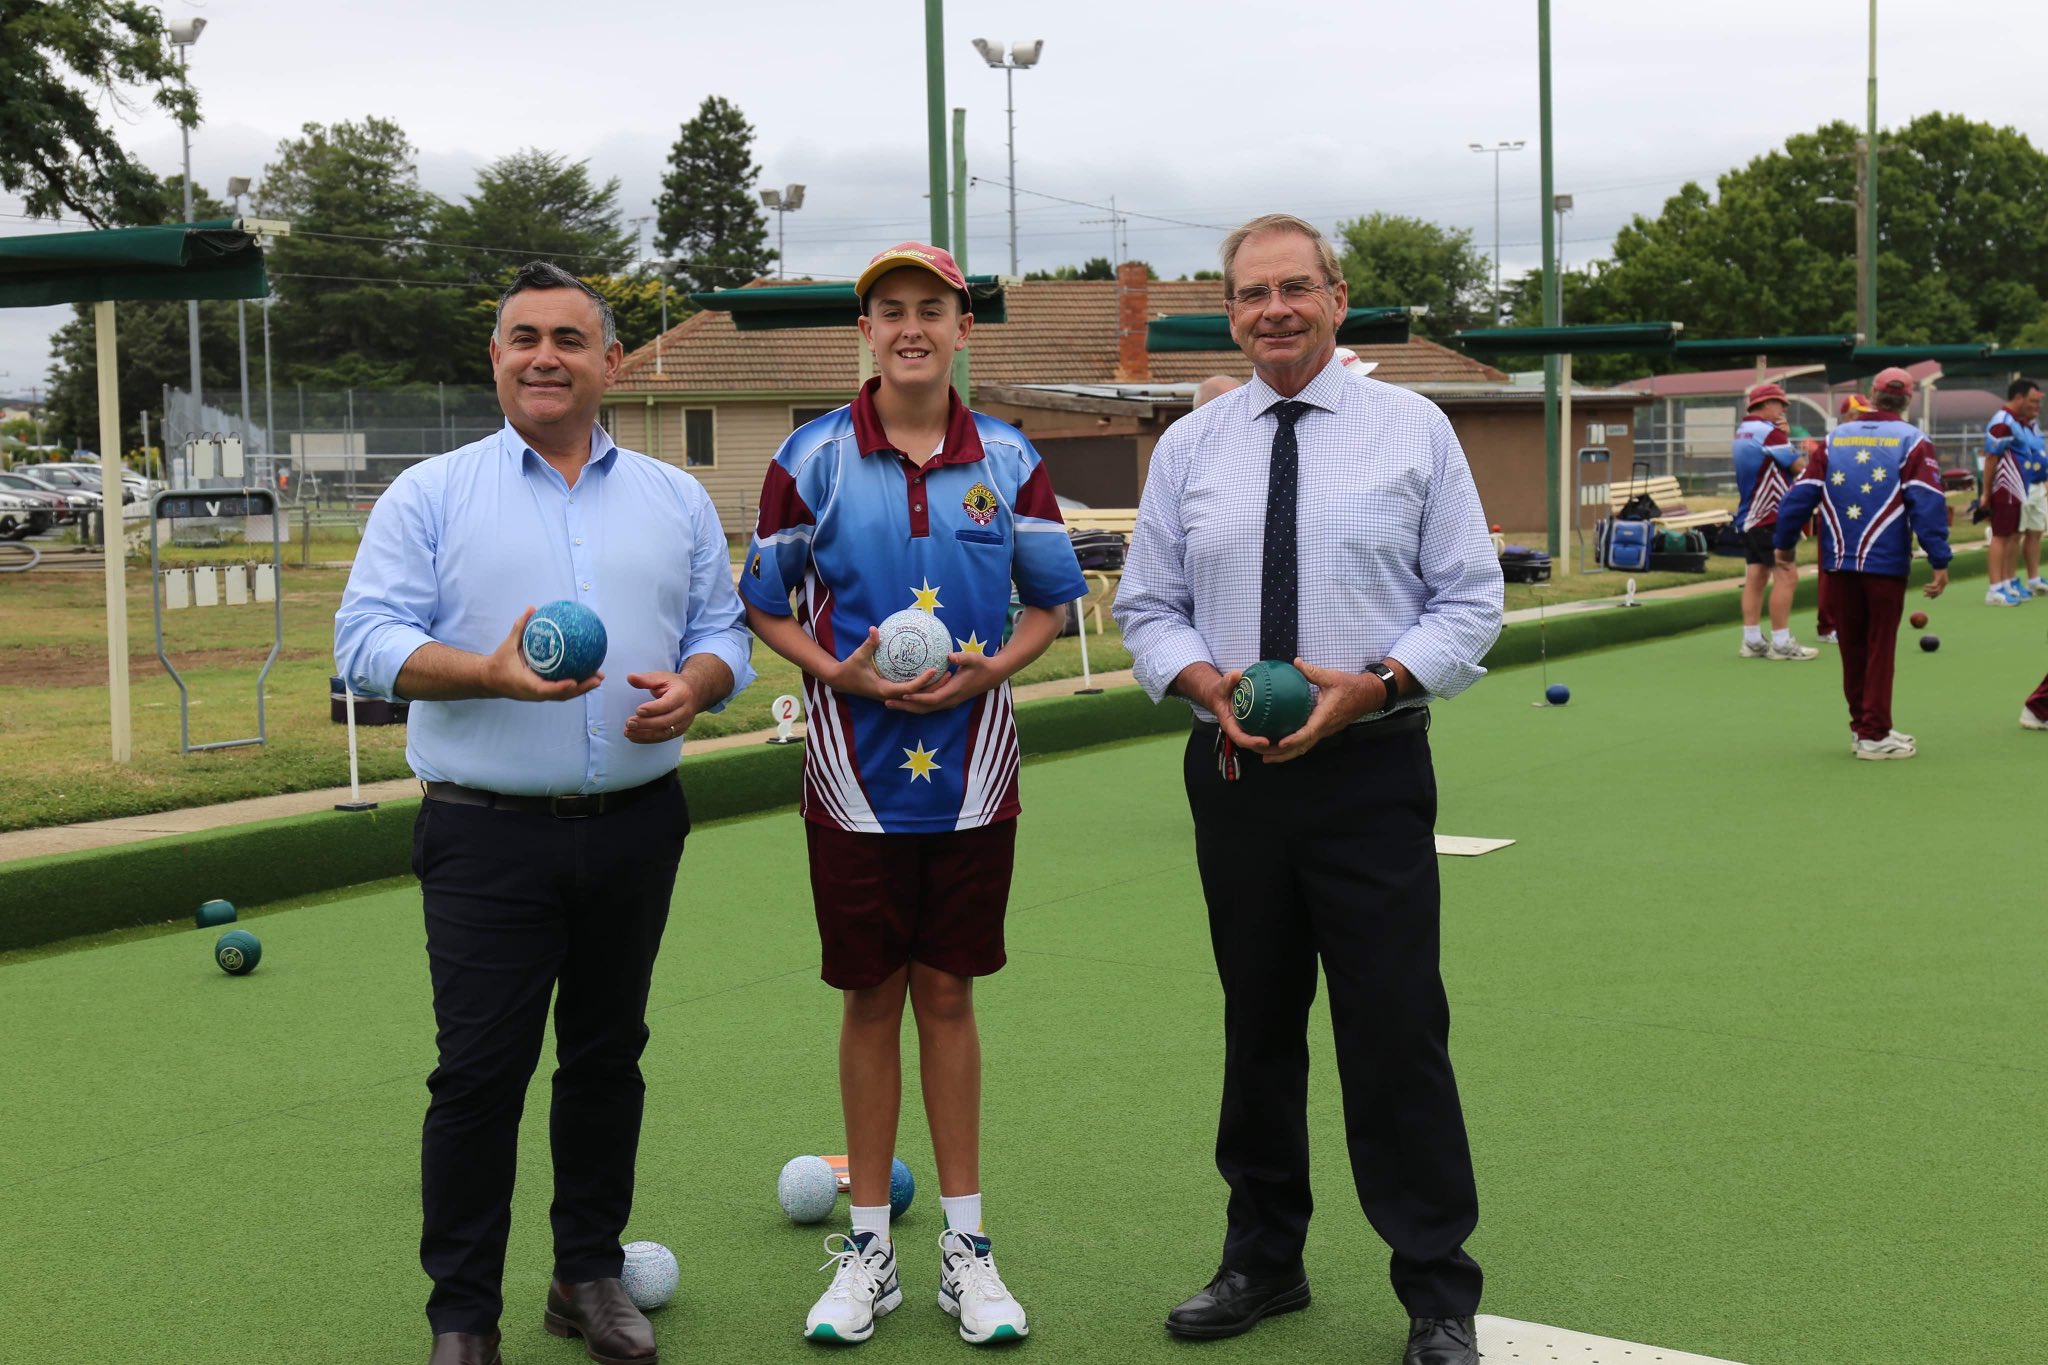 Synthetic greens at Queanbeyan tell story of survival for lawn bowls club